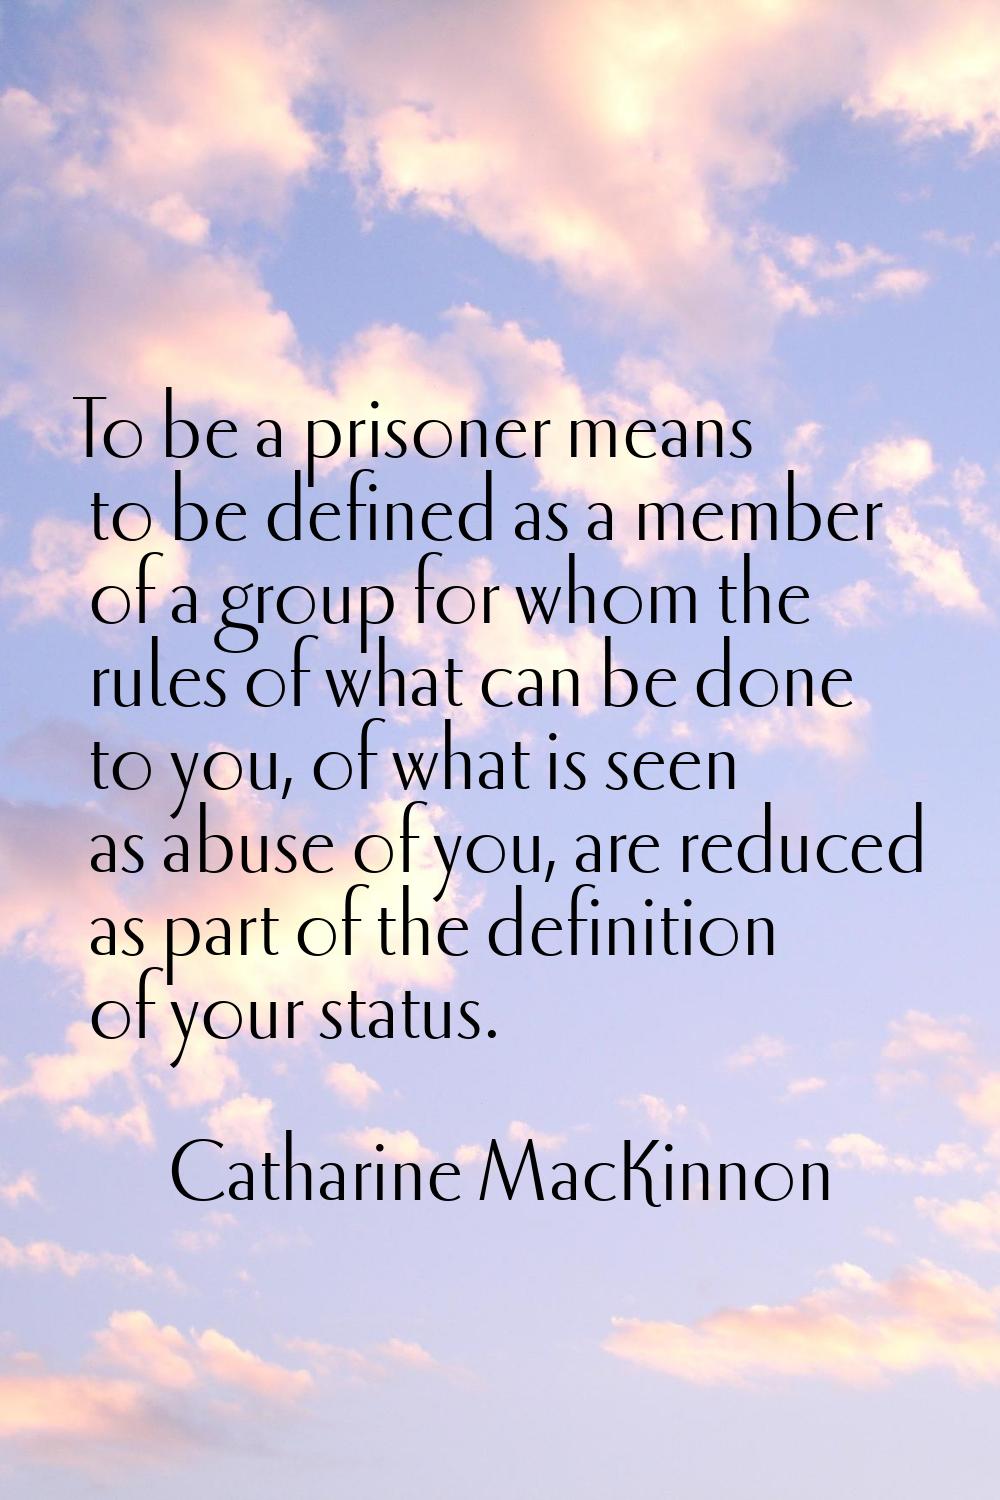 To be a prisoner means to be defined as a member of a group for whom the rules of what can be done 